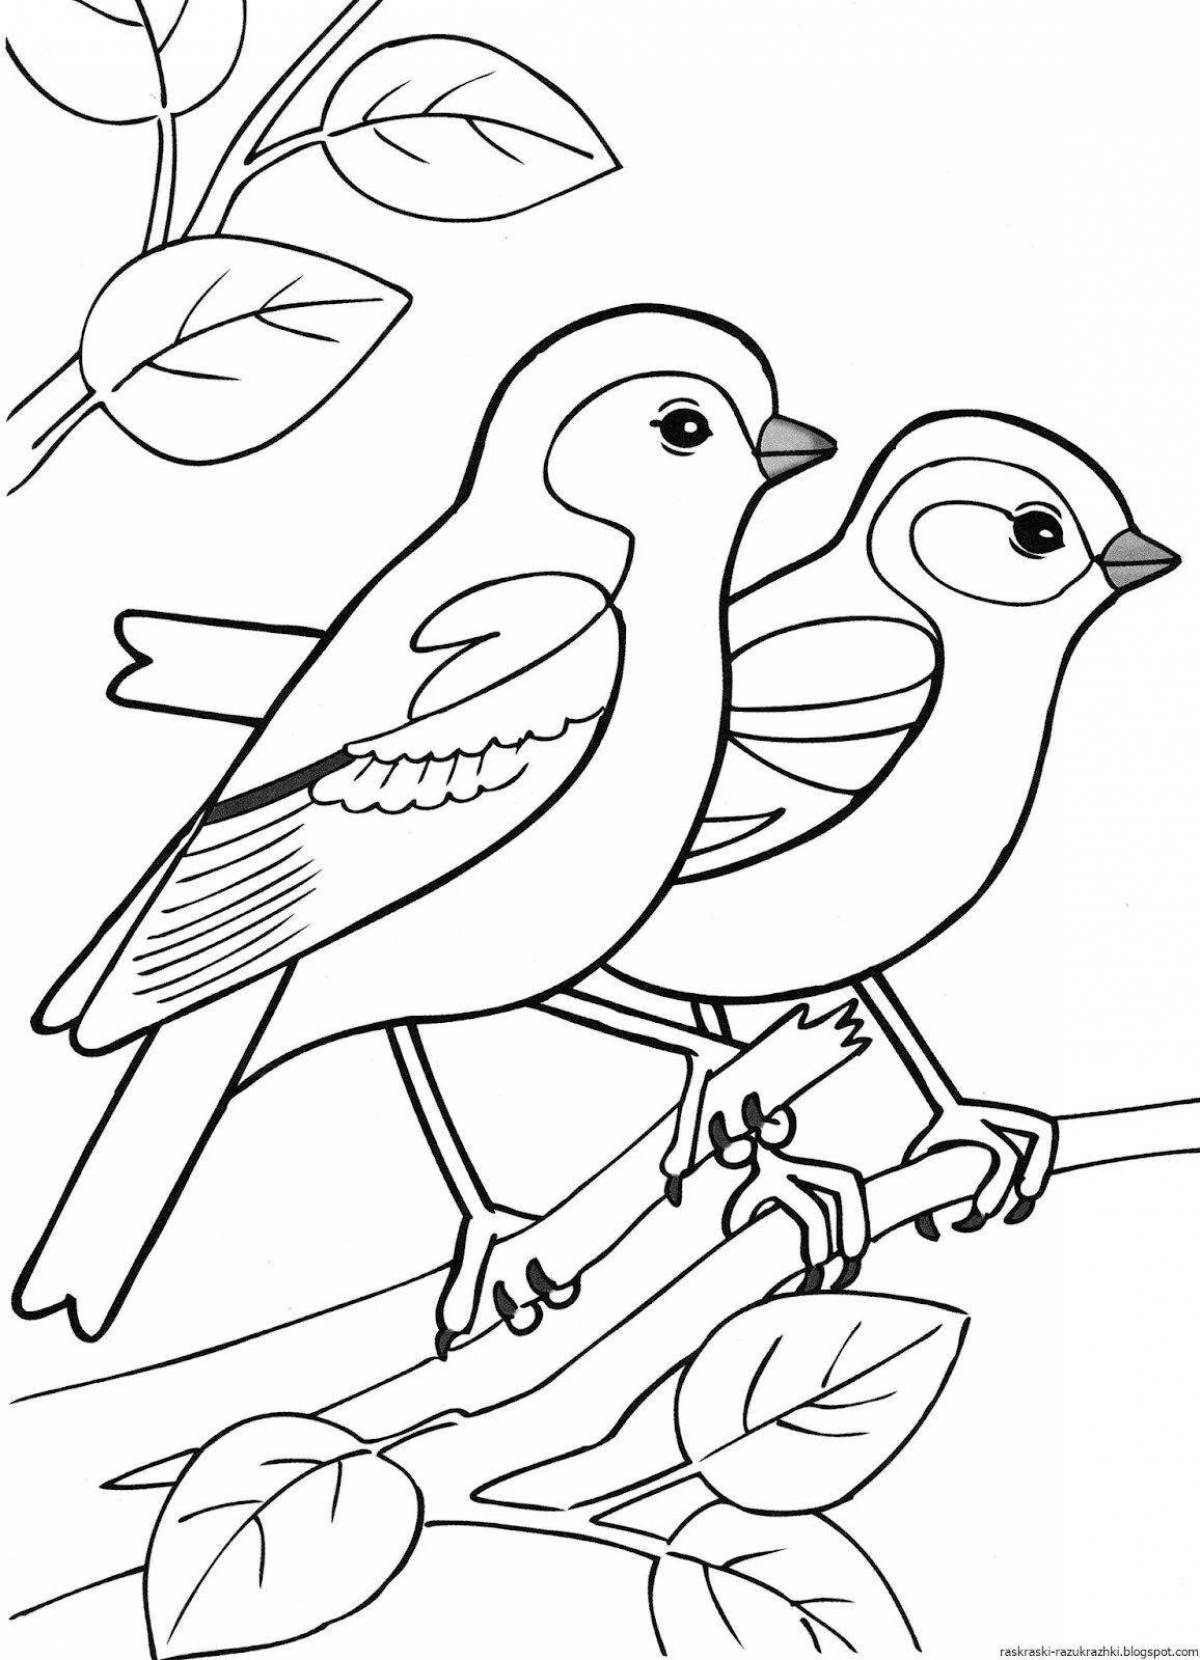 Great coloring pages of migratory birds for 6-7 year olds